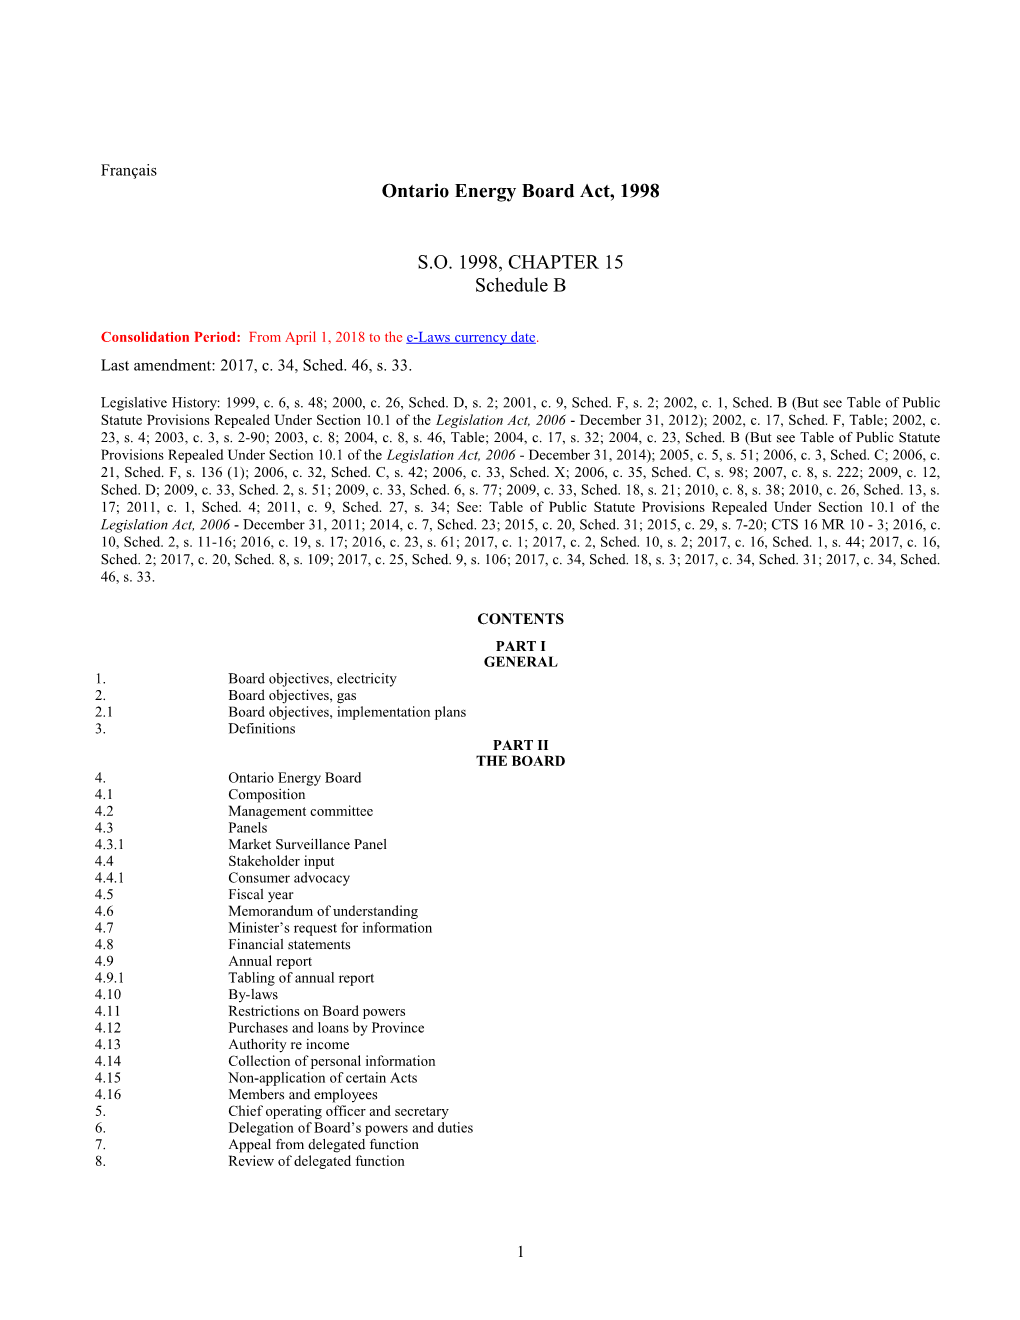 Ontario Energy Board Act, 1998, S.O. 1998, C. 15, Sched. B